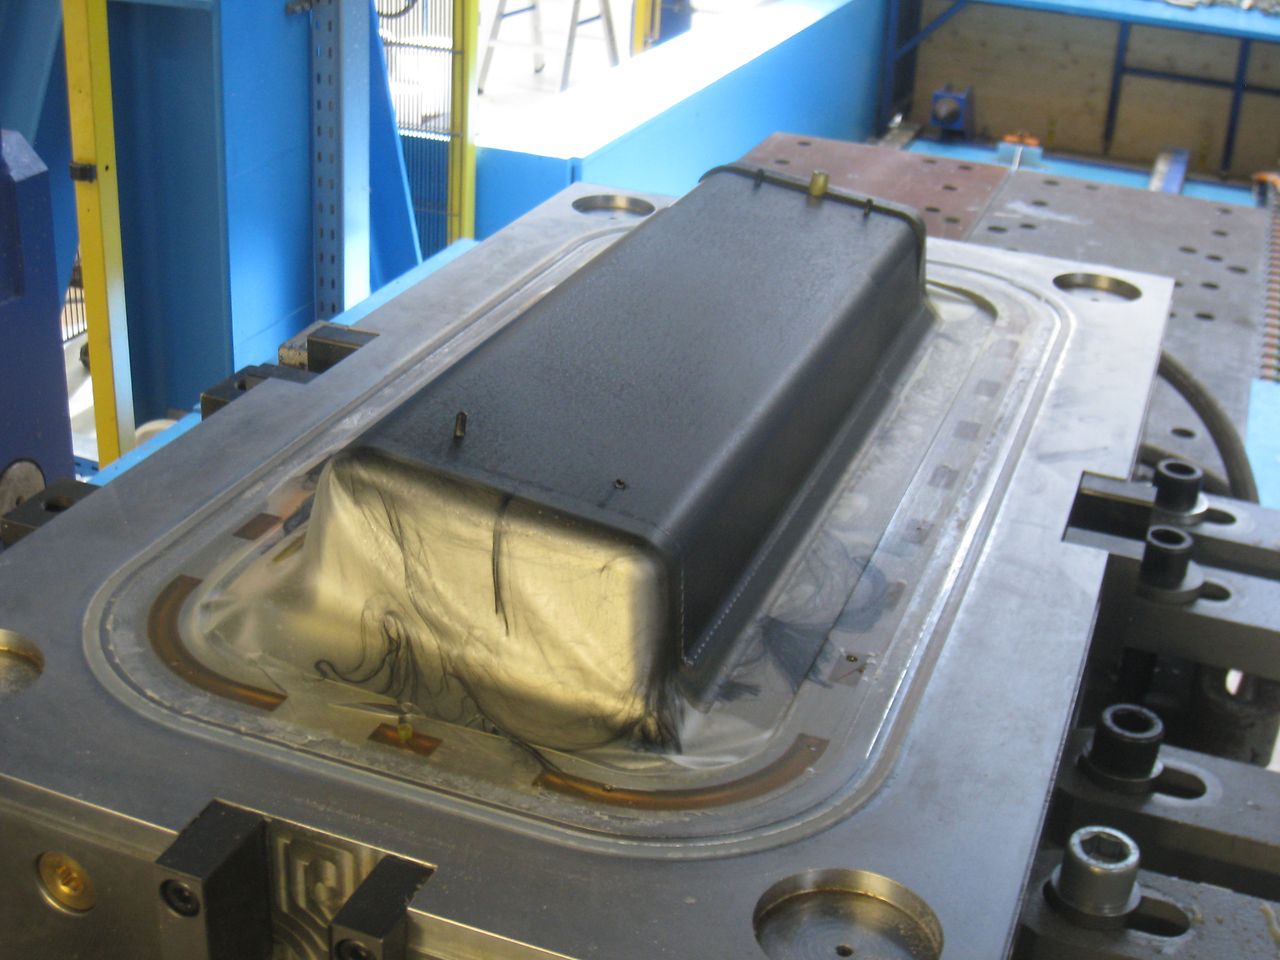 Open mold of Ningbo Huaxiang (CN) with the unmachined part before demolding (KraussMaffei in Munich, Germany)